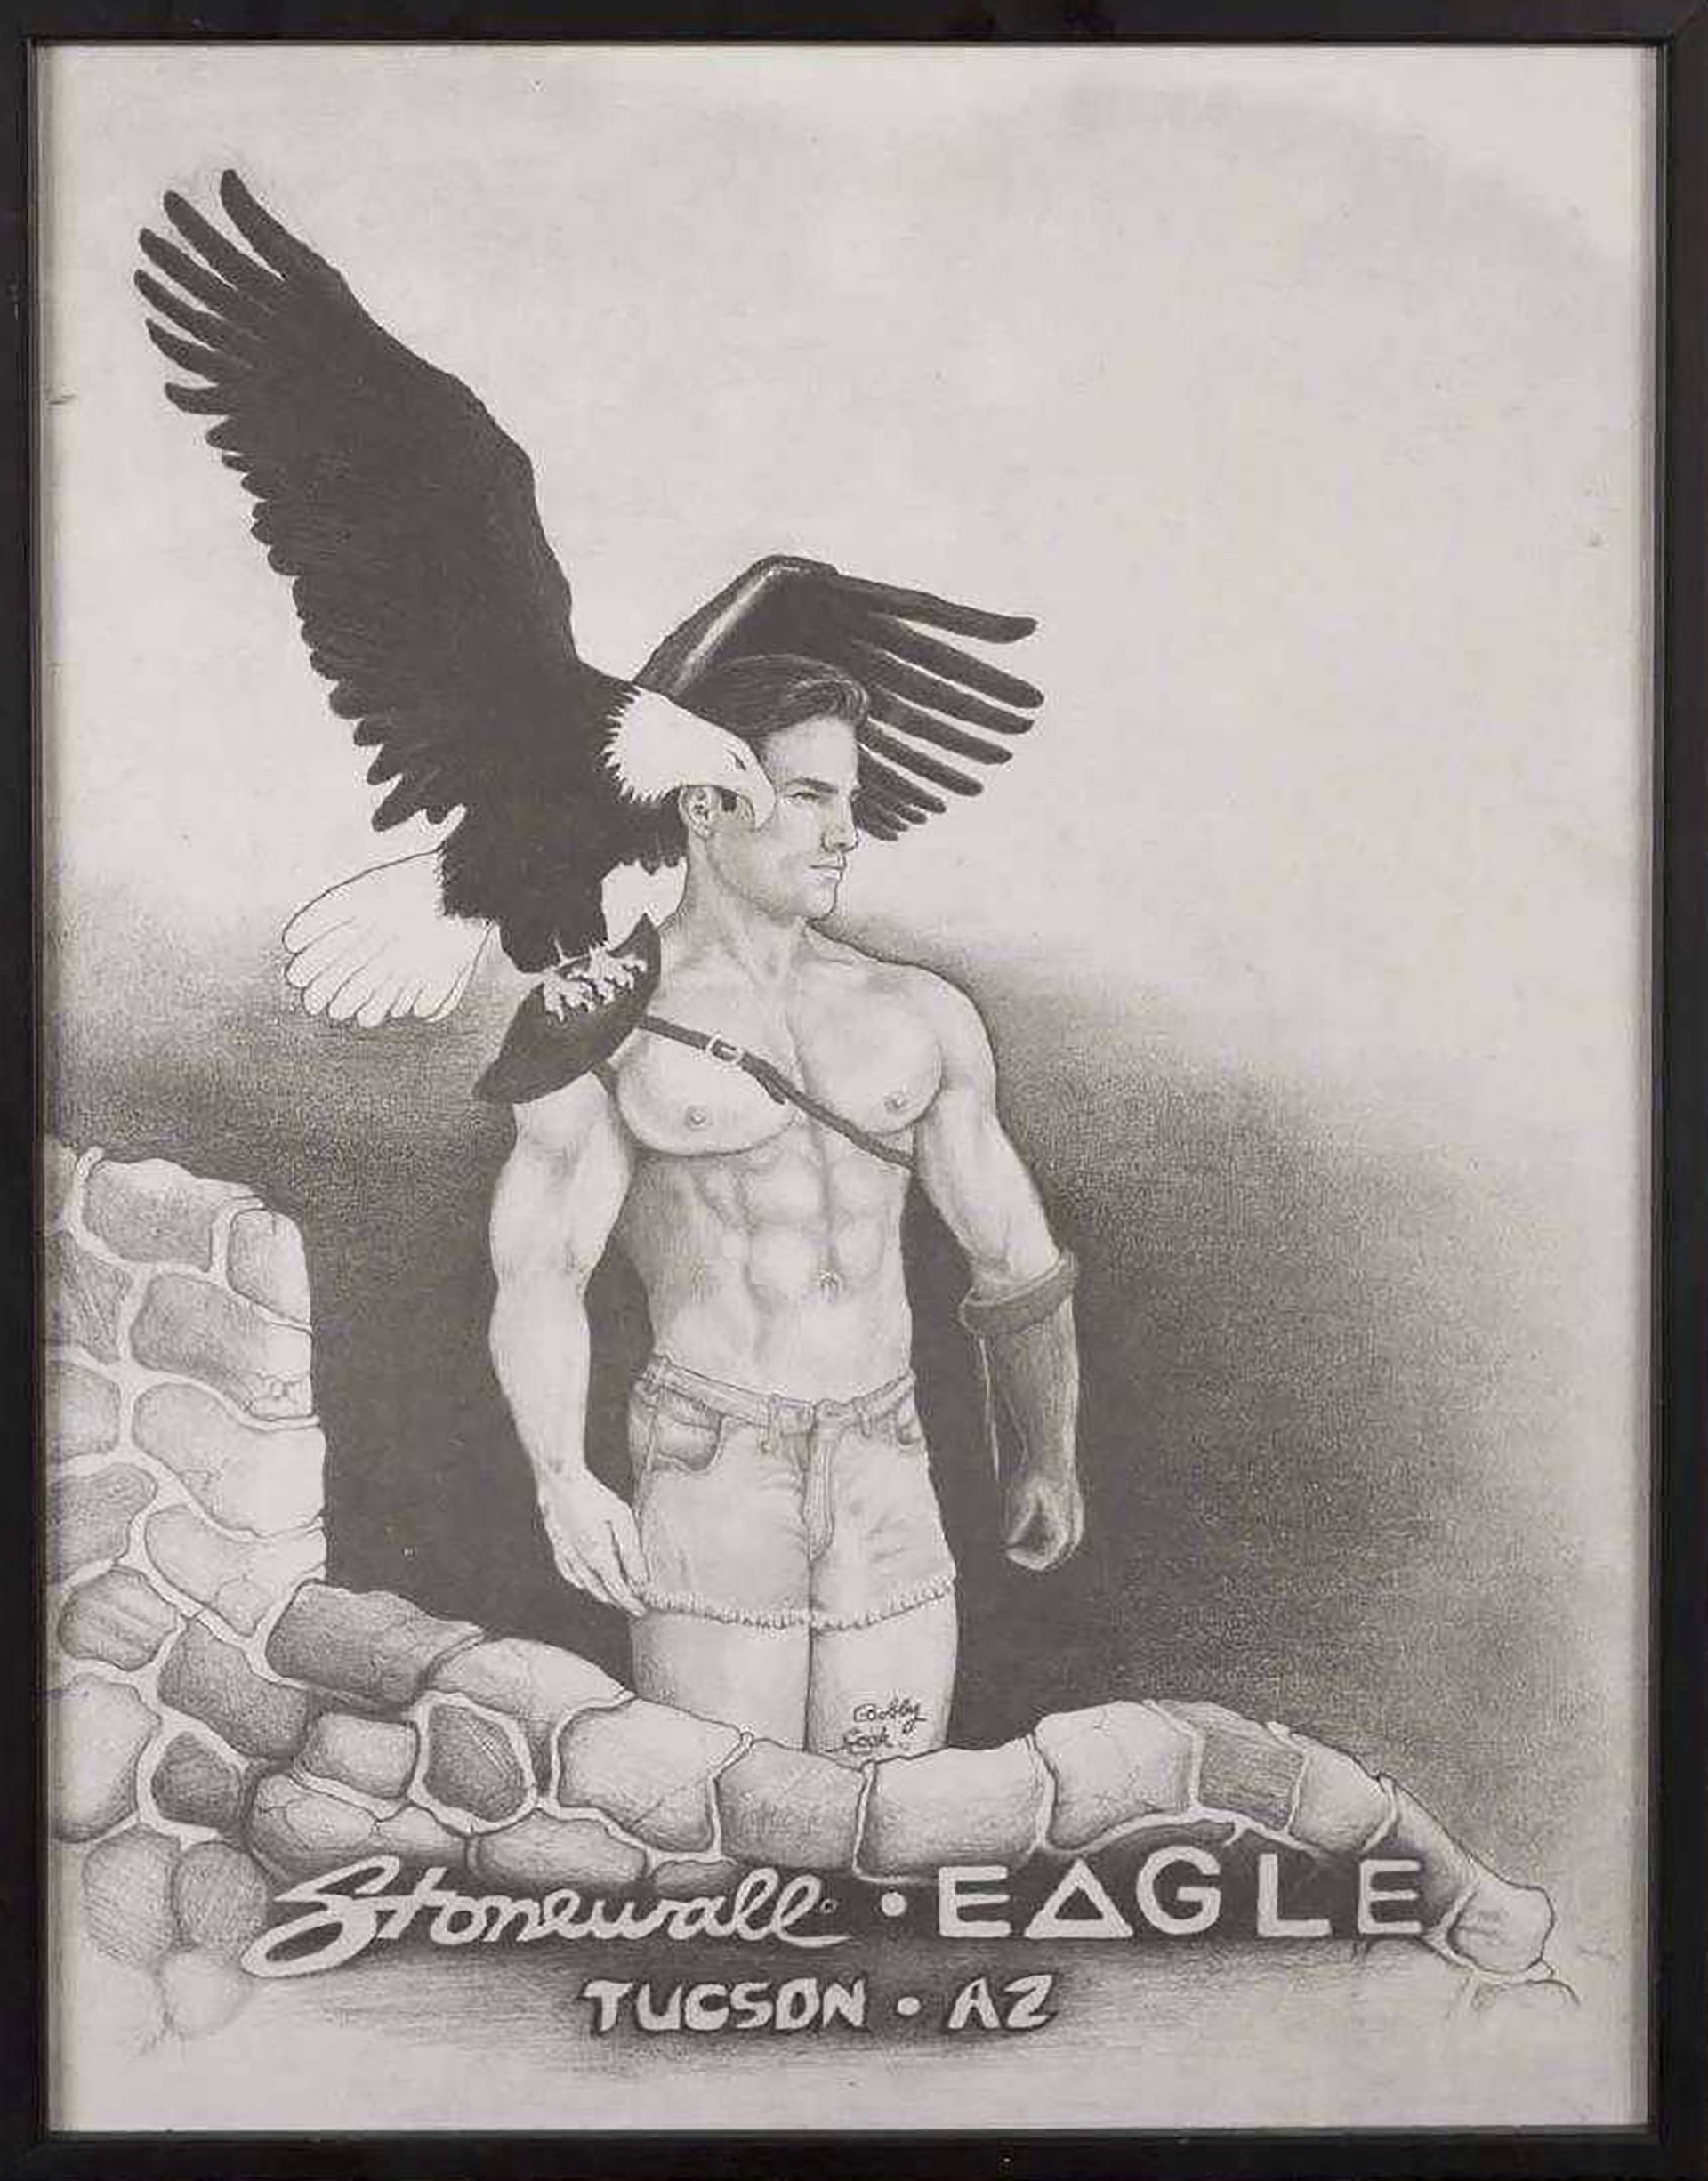 STONEWALL EAGLE DRAWING by Bobby Cook